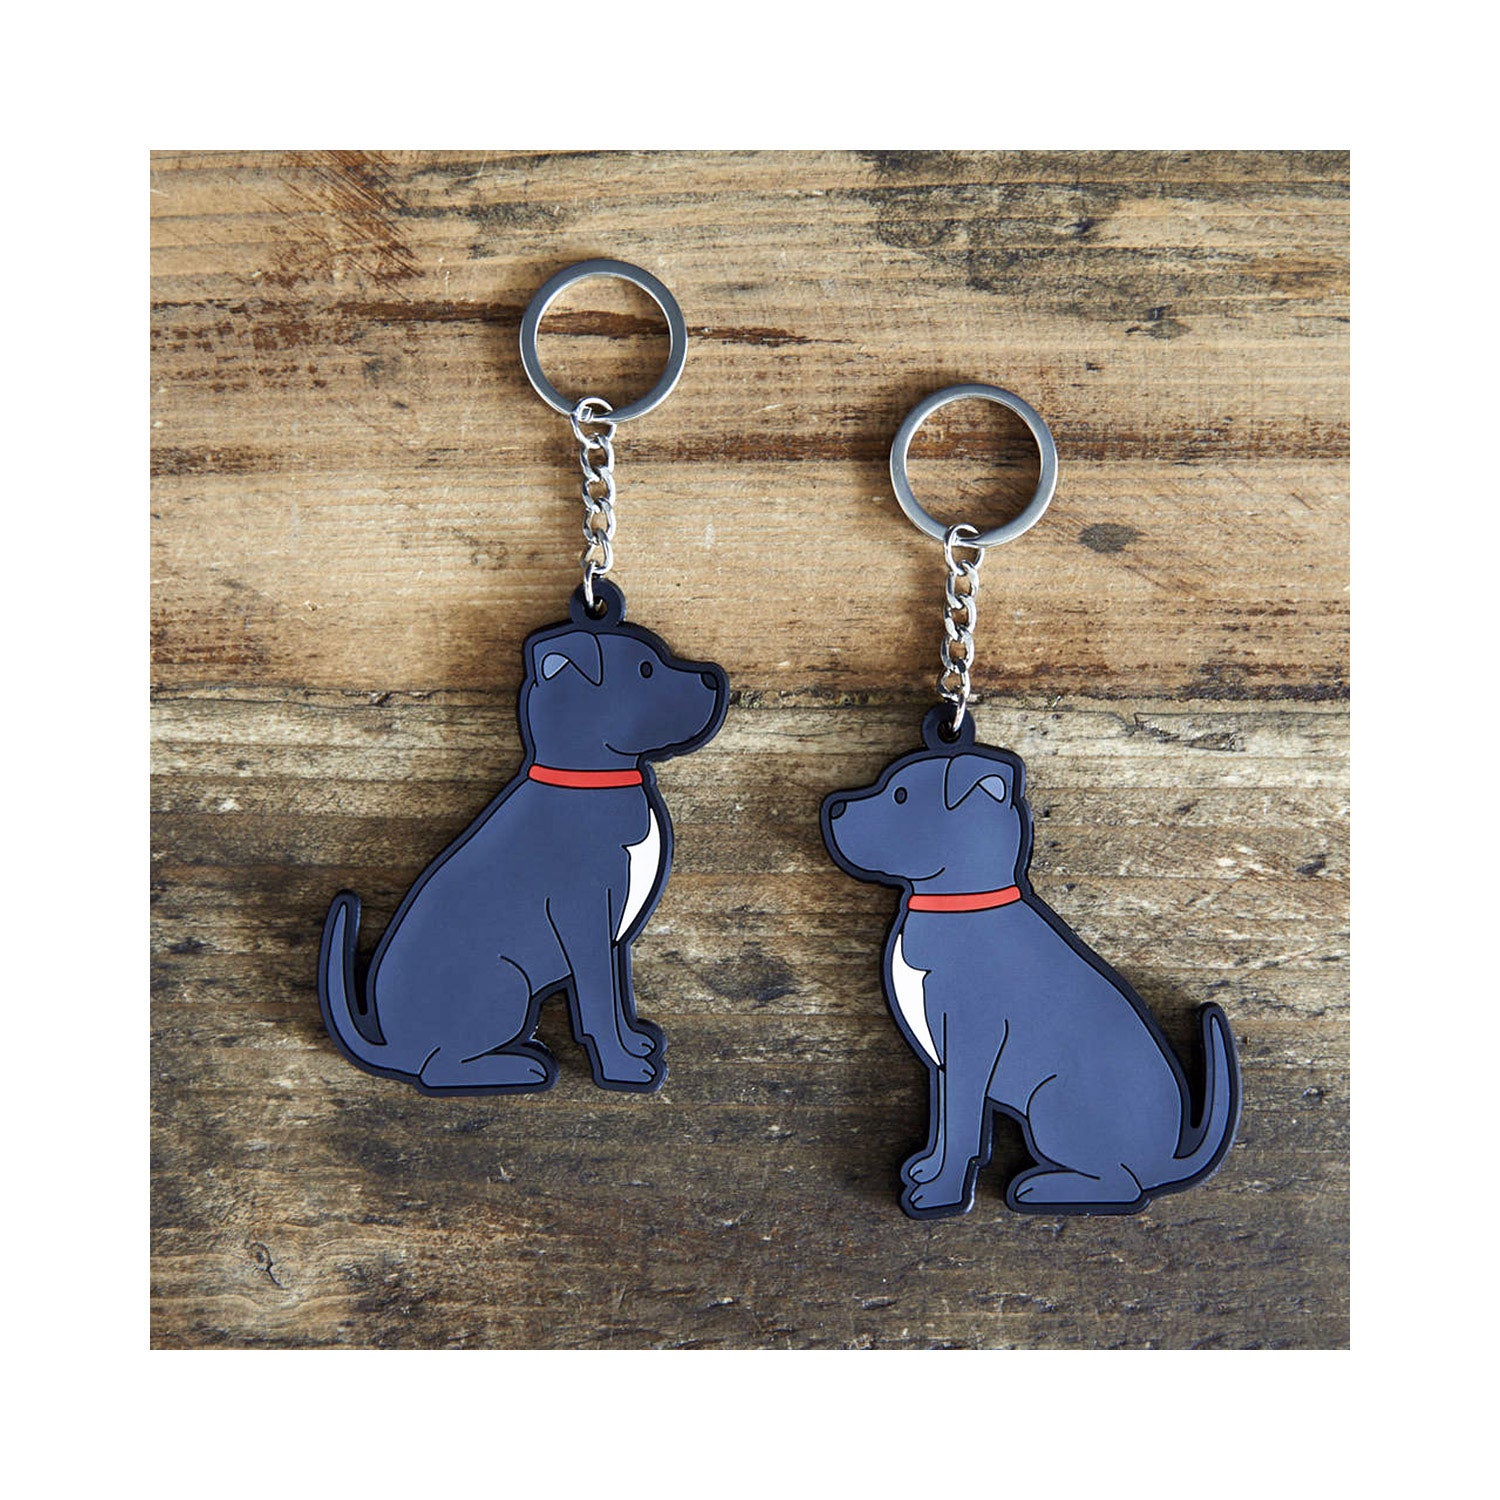 Dog Lover Gifts available at Dog Krazy Gifts - Bree The Staffordshire Bull Terrier Keyring - part of the Sweet William range available from Dog Krazy Gifts